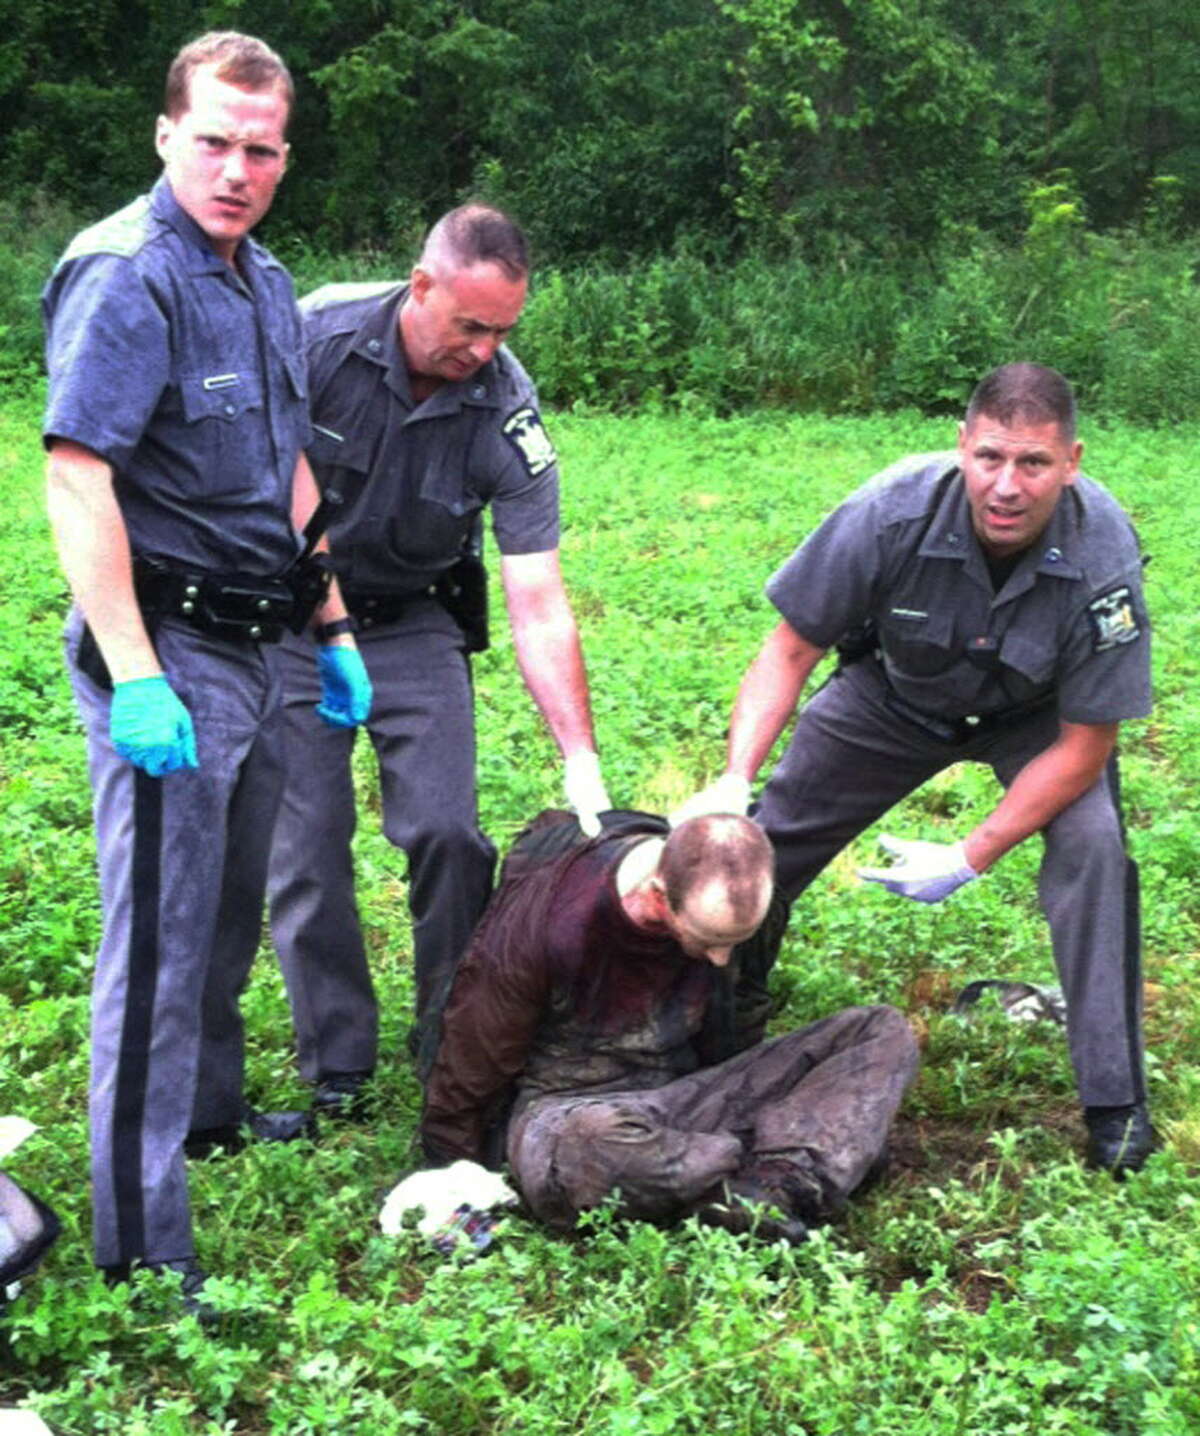 Police stand over David Sweat after he was shot and captured near the Canadian border Sunday, June 28, 2015, in Constable, N.Y. Sweat is the second of two convicted murderers who staged a brazen escape three weeks ago from a maximum-security prison in northern New York. His capture came two days after his escape partner, Richard Matt, was shot and killed by authorities. (AP Photo)